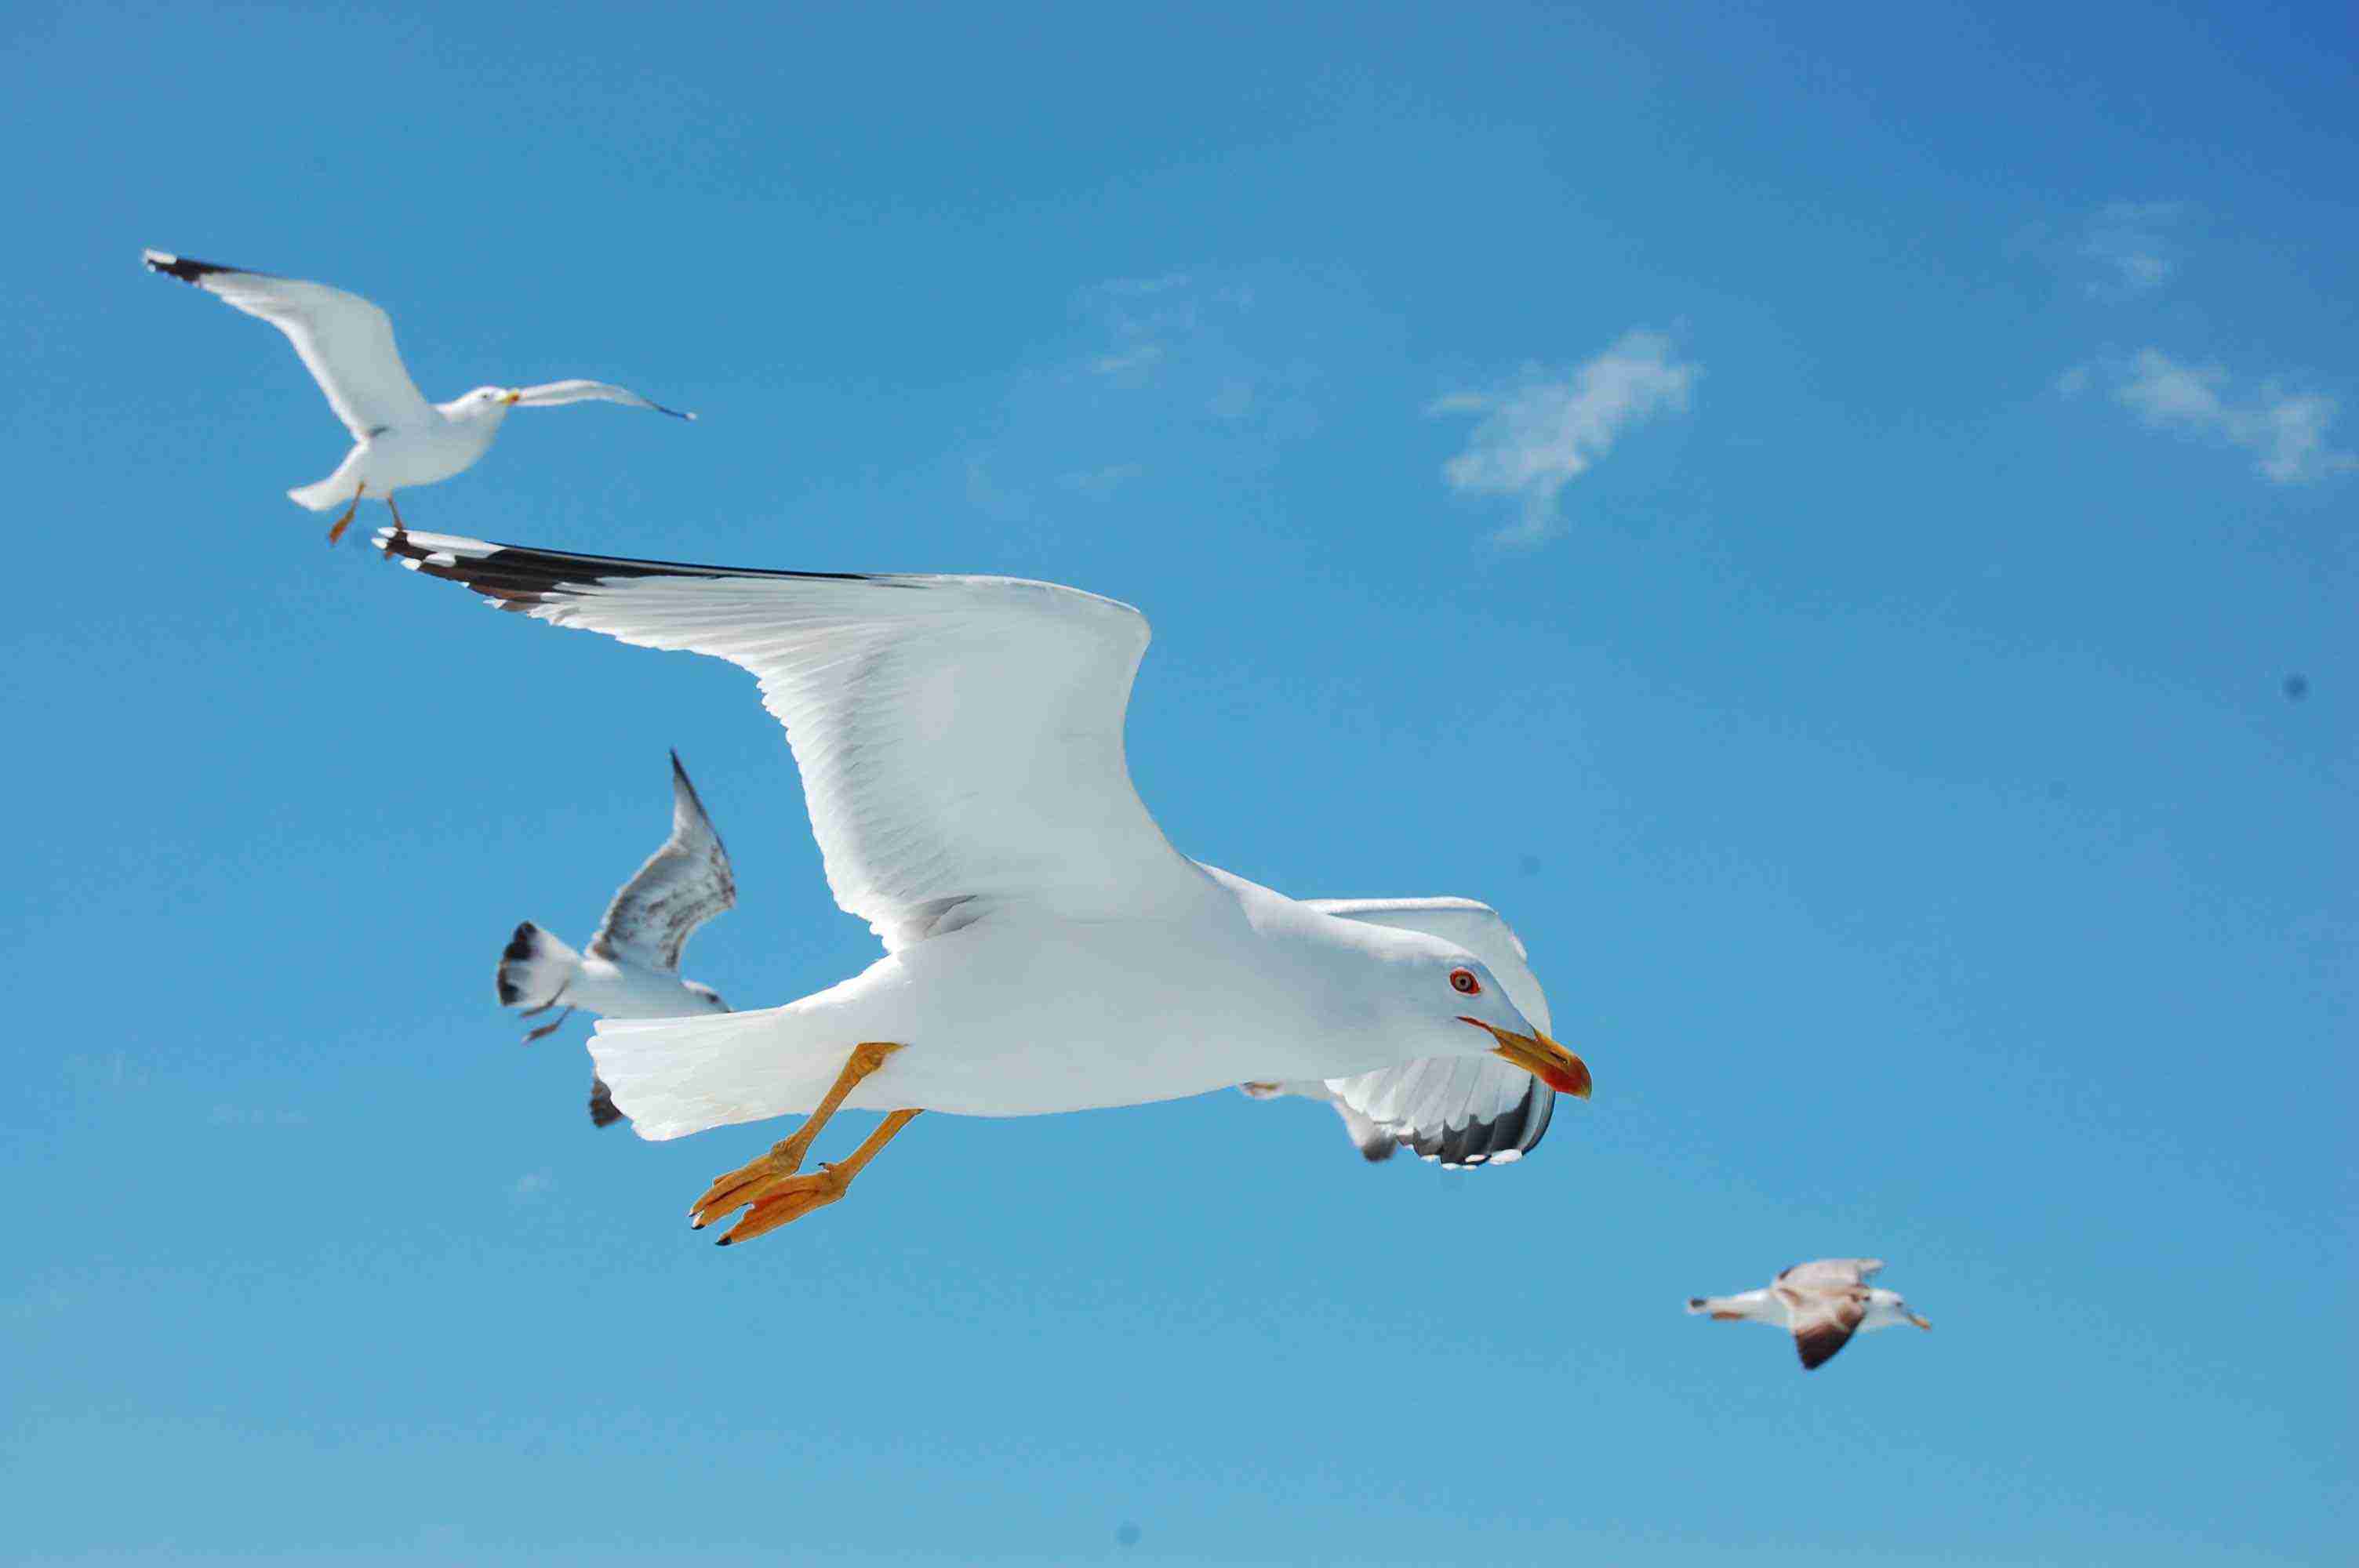 close-up photo of seagulls against a blue sky